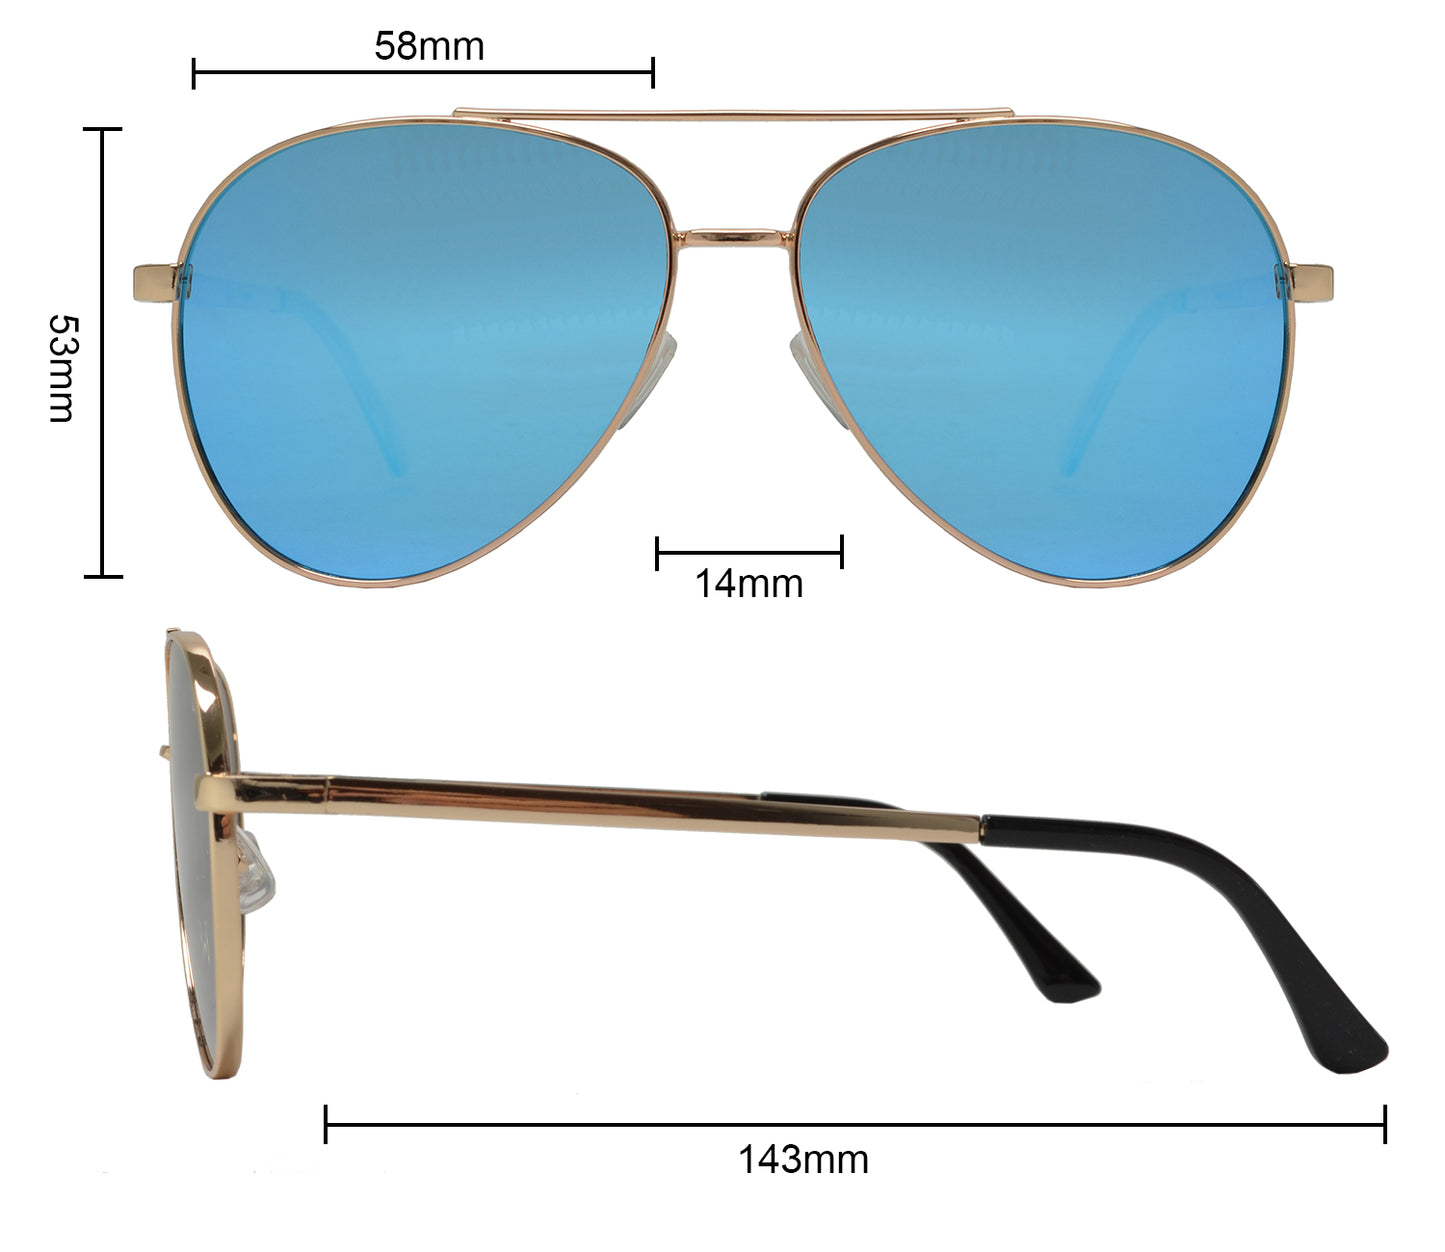 FC 6514 Blue RV - Thick Frame Oval Shaped Sunglasses with Blue Mirror Lens